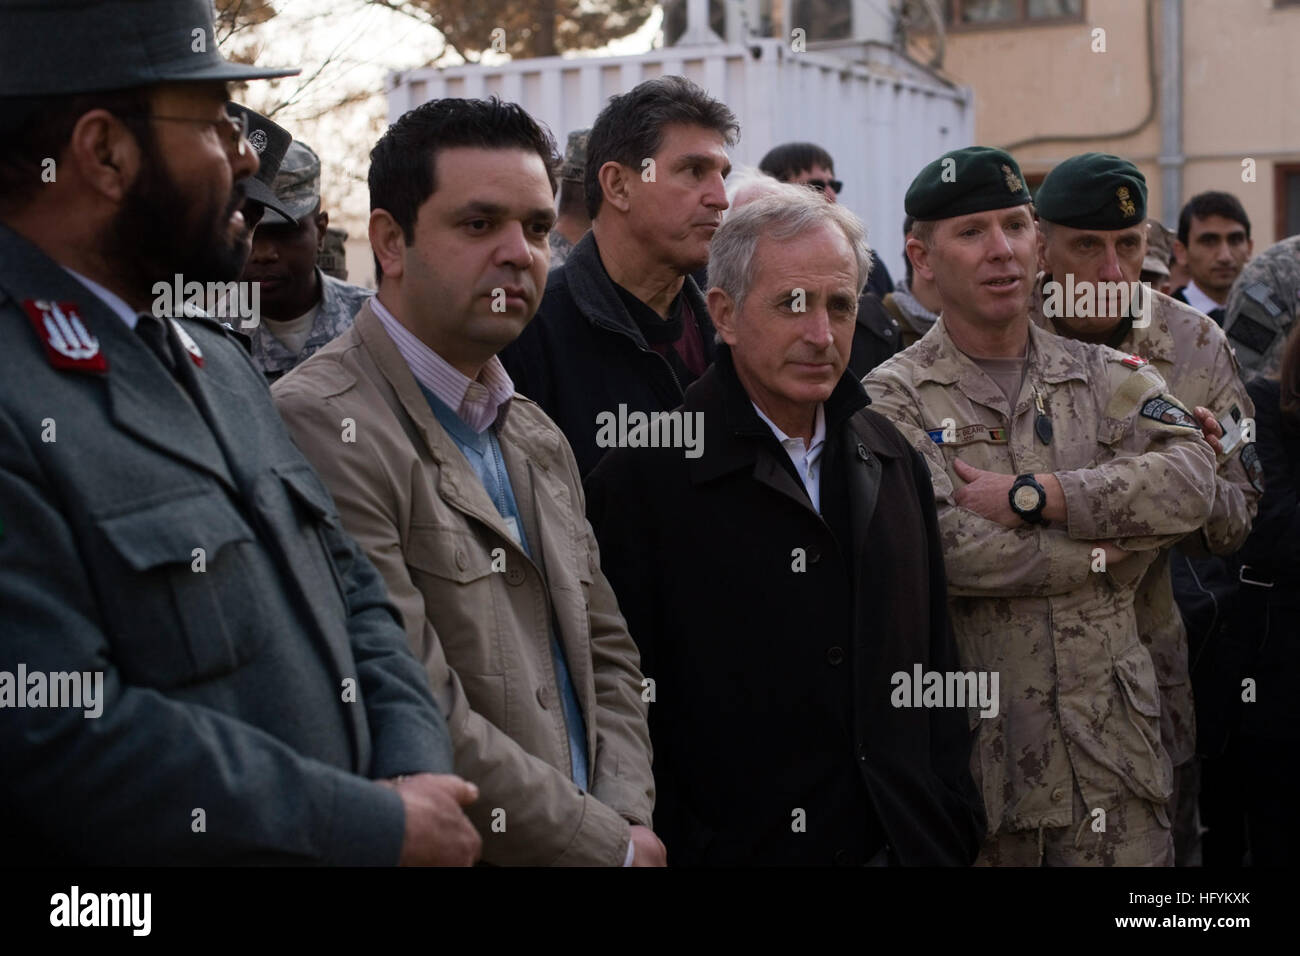 Senate Foreign Relations Committee member Sen. Bob Corker, R-Tenn., looks at students training at the Afghan National Police Academy Feb. 20, in Kabul, Afghanistan. The police displayed how to clear a building and search a suspect to a congressional delegation visiting the NATO Training Mission-Afghanistan supported training site. US Senators visit Afghan National Police Academy, witness demonstration DVIDS369237 Stock Photo